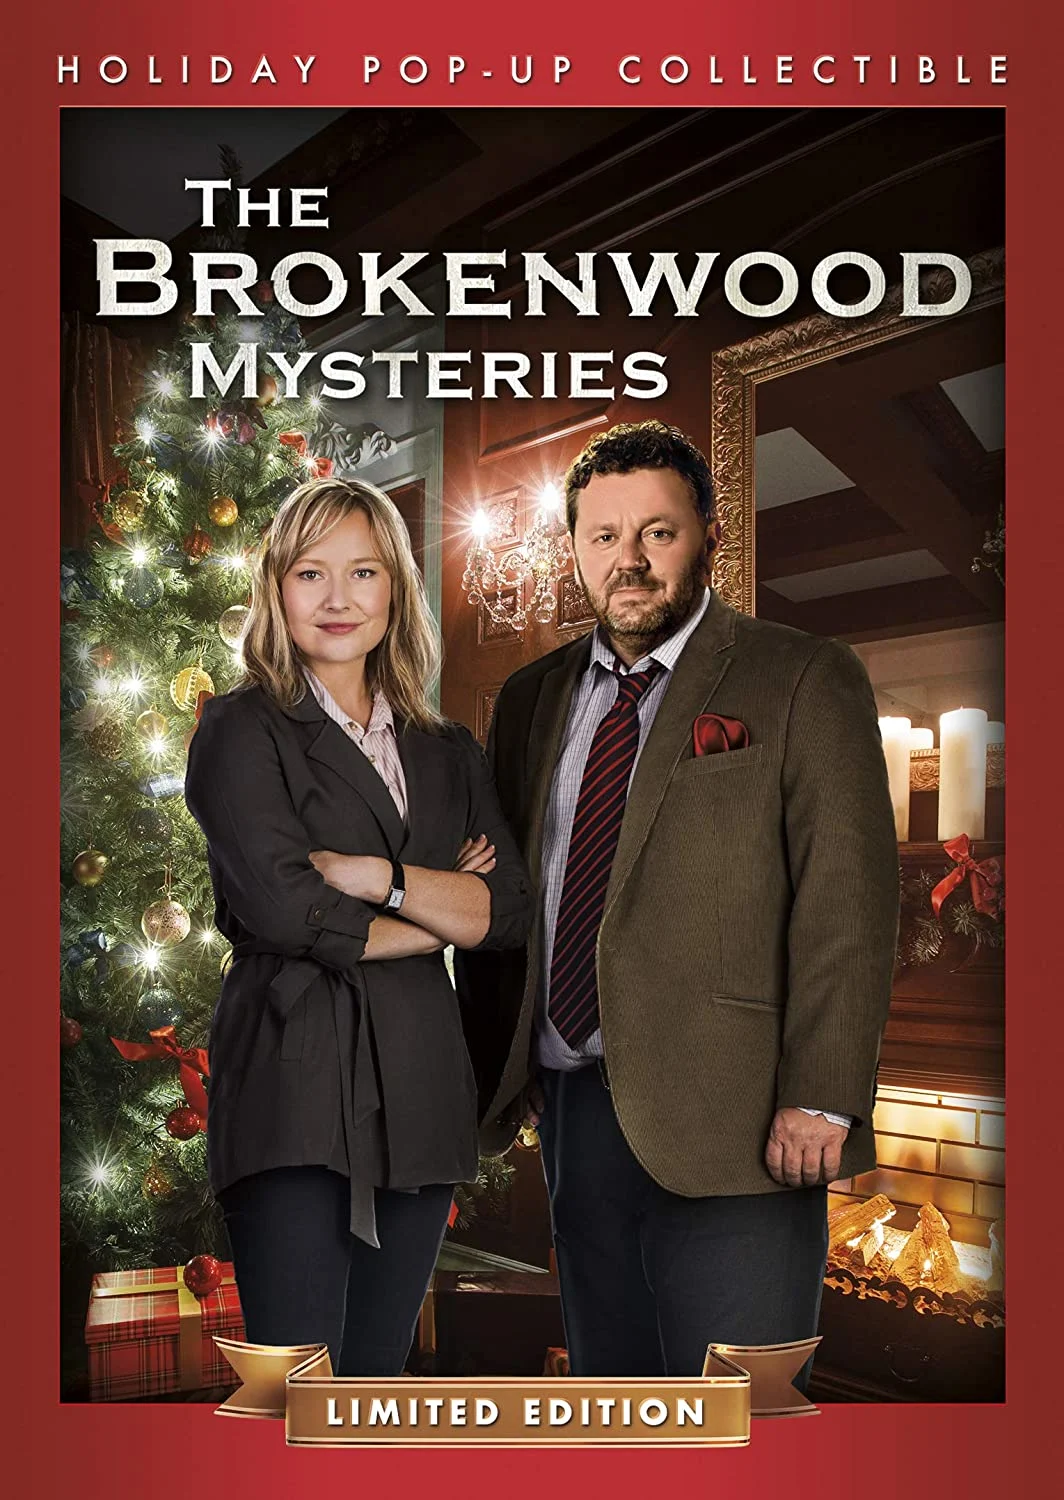 Brokenwood Mysteries: Holiday Pop-Up Collectible (DVD) on MovieShack